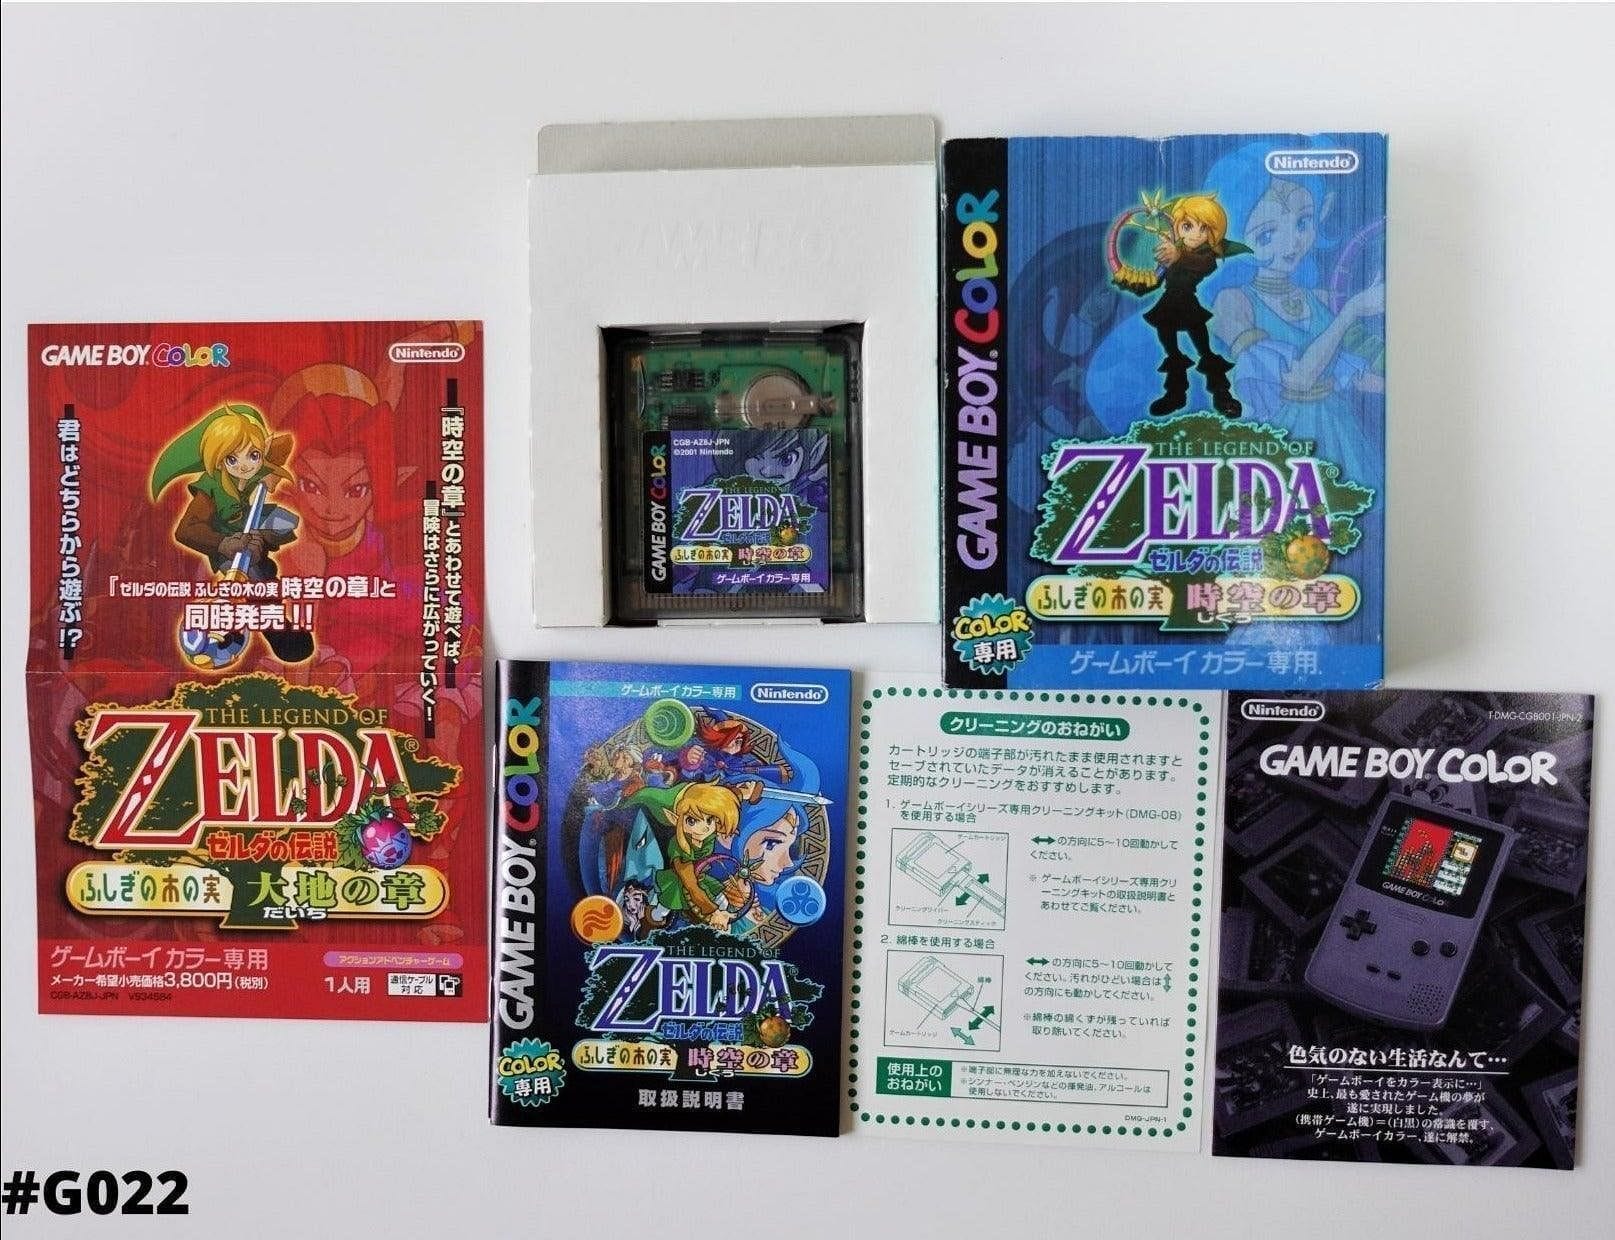 The Legend of Zelda: Oracle of Ages | Gameboy Color ChitoroShop